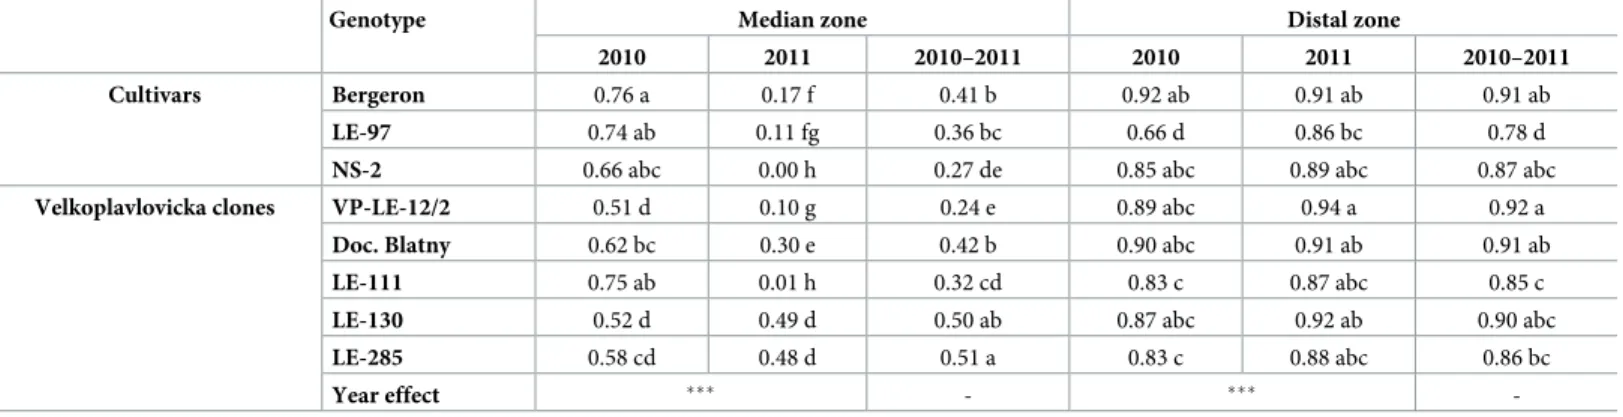 Table 2. Frequency of occurrence of the median and distal zones per shoot depending on the genotype and year of shoot development